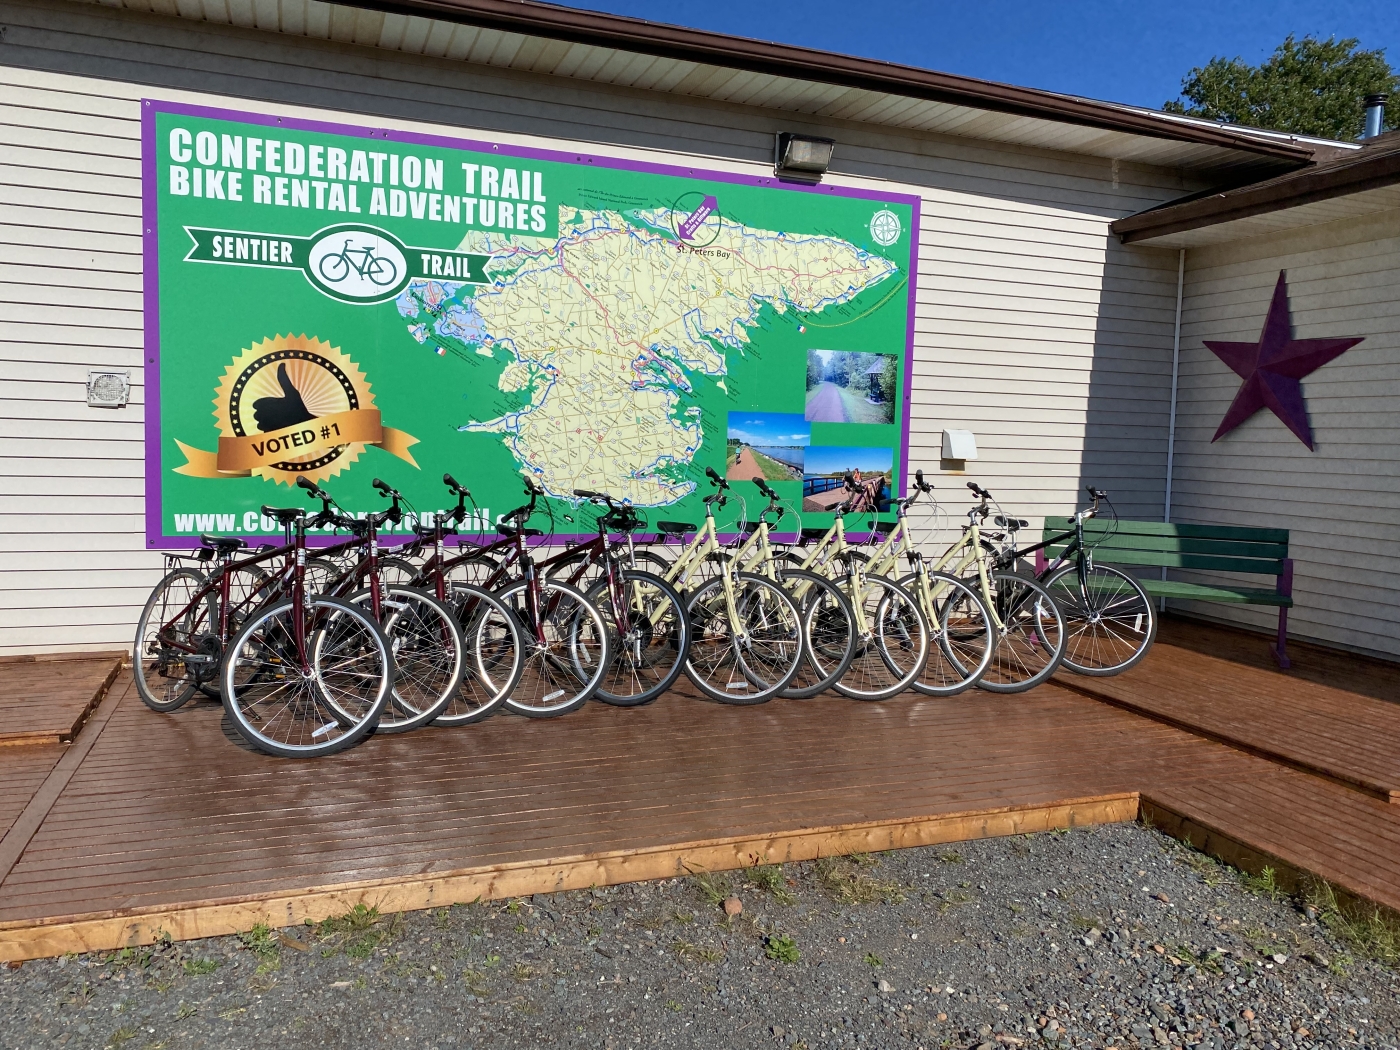 Image of many bikes lined up outdoors under sign of Confederation Trail Bike Rental Adventures